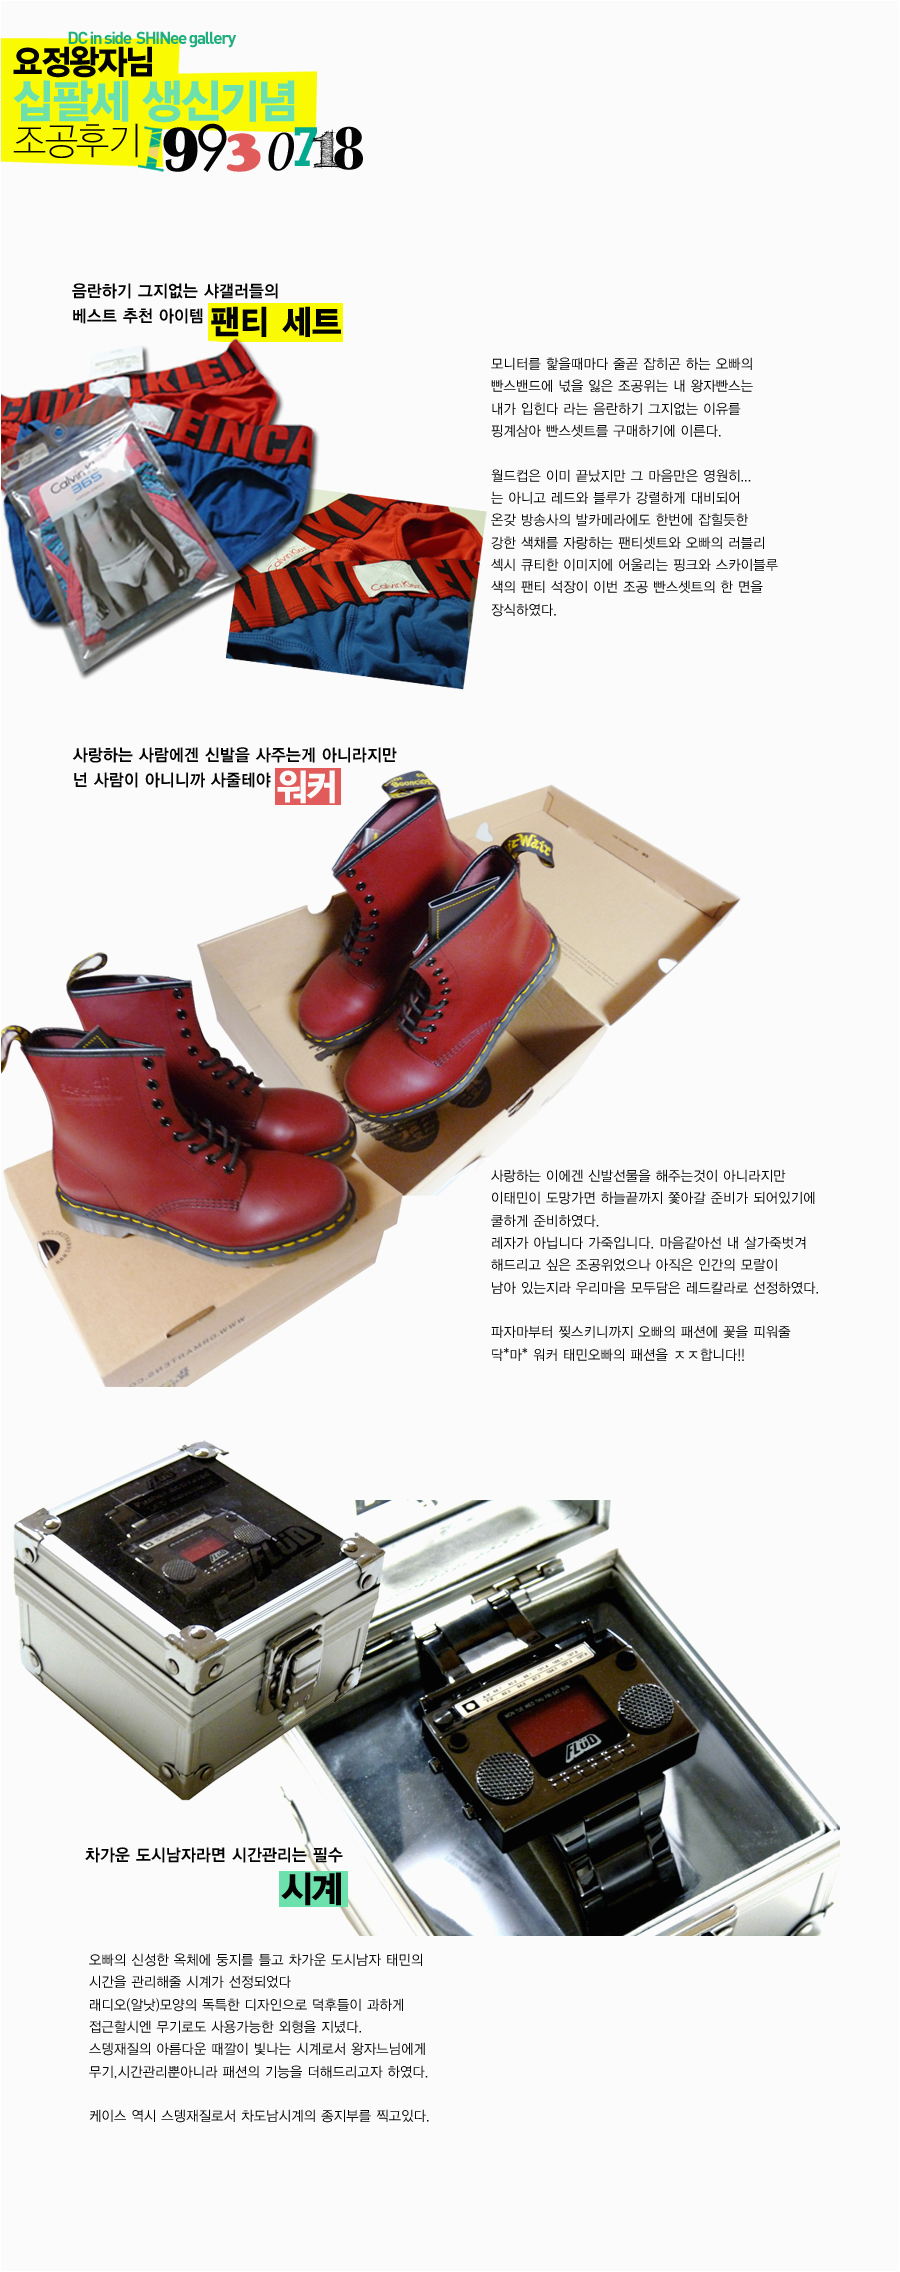 Expensive 18th Birthday Gifts for Him Taemin S 18th Birthday Gifts From Dc Inside Shinee